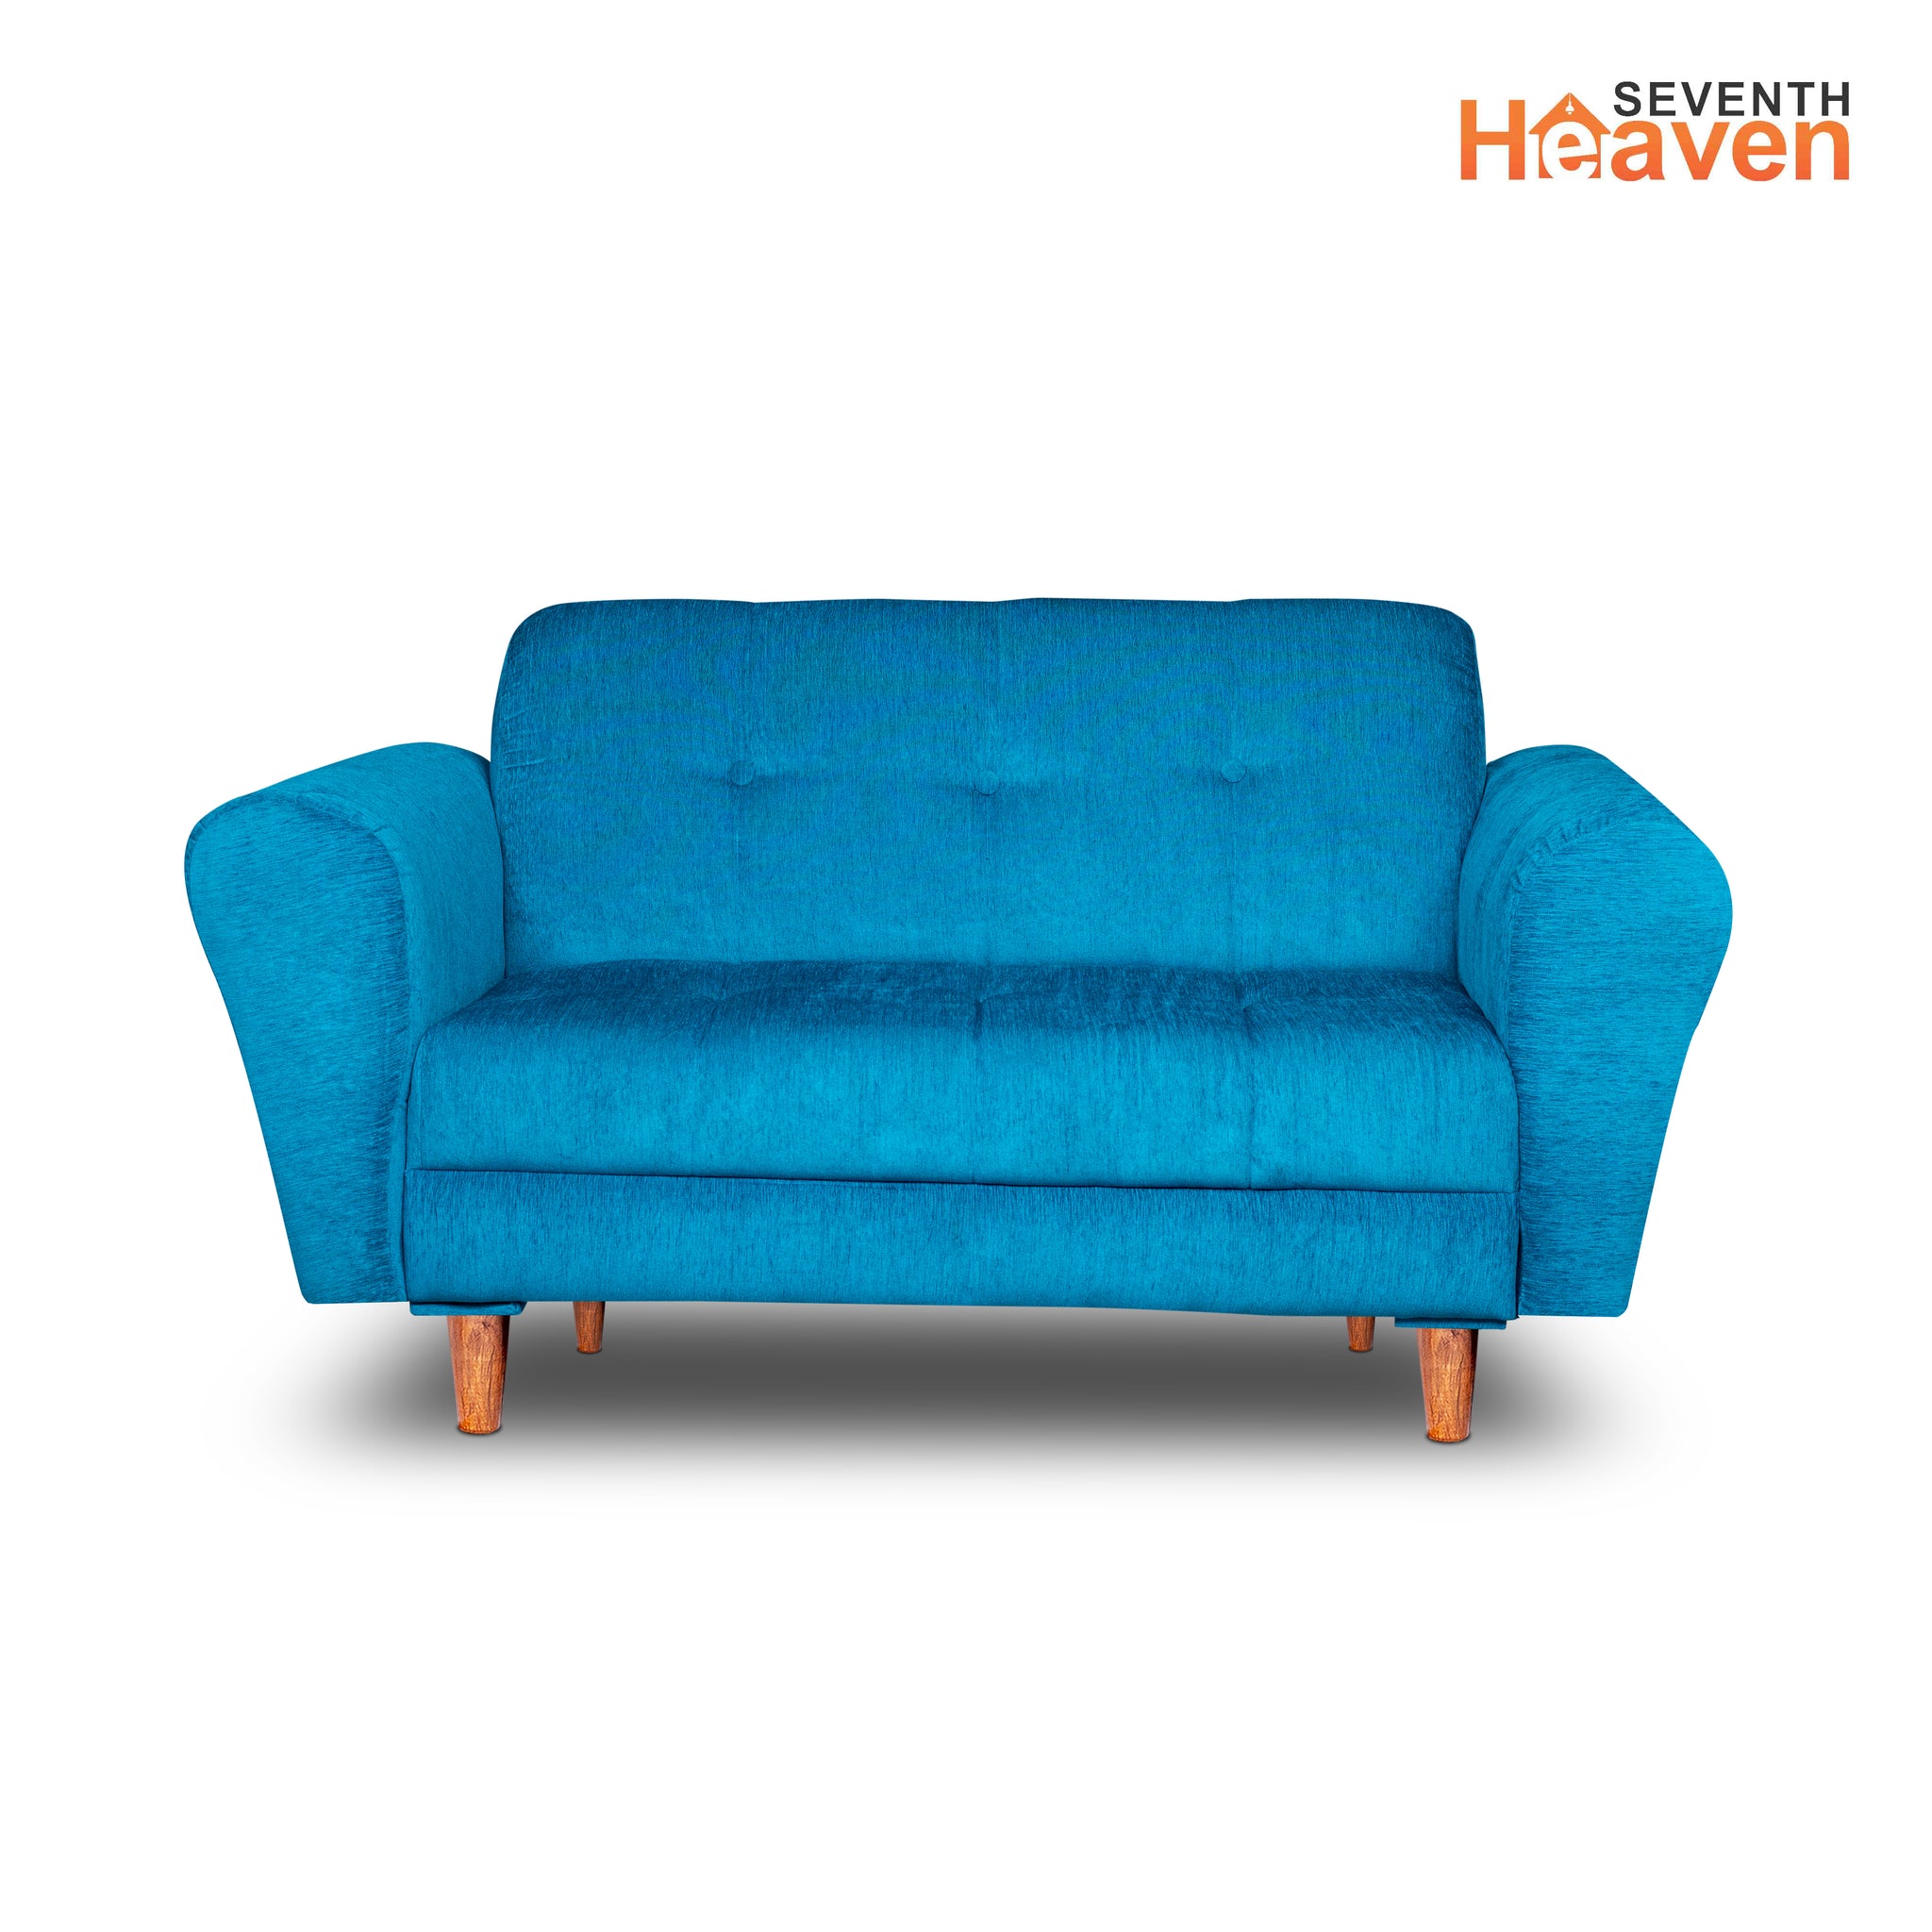 Seventh Heaven Milan 2 Seater Wooden Sofa Set Modern & Elegant Smart Furniture Range for luxurious homes, living rooms and offices. Sky Blue Colour Molphino fabric with sheesham polished wooden legs.